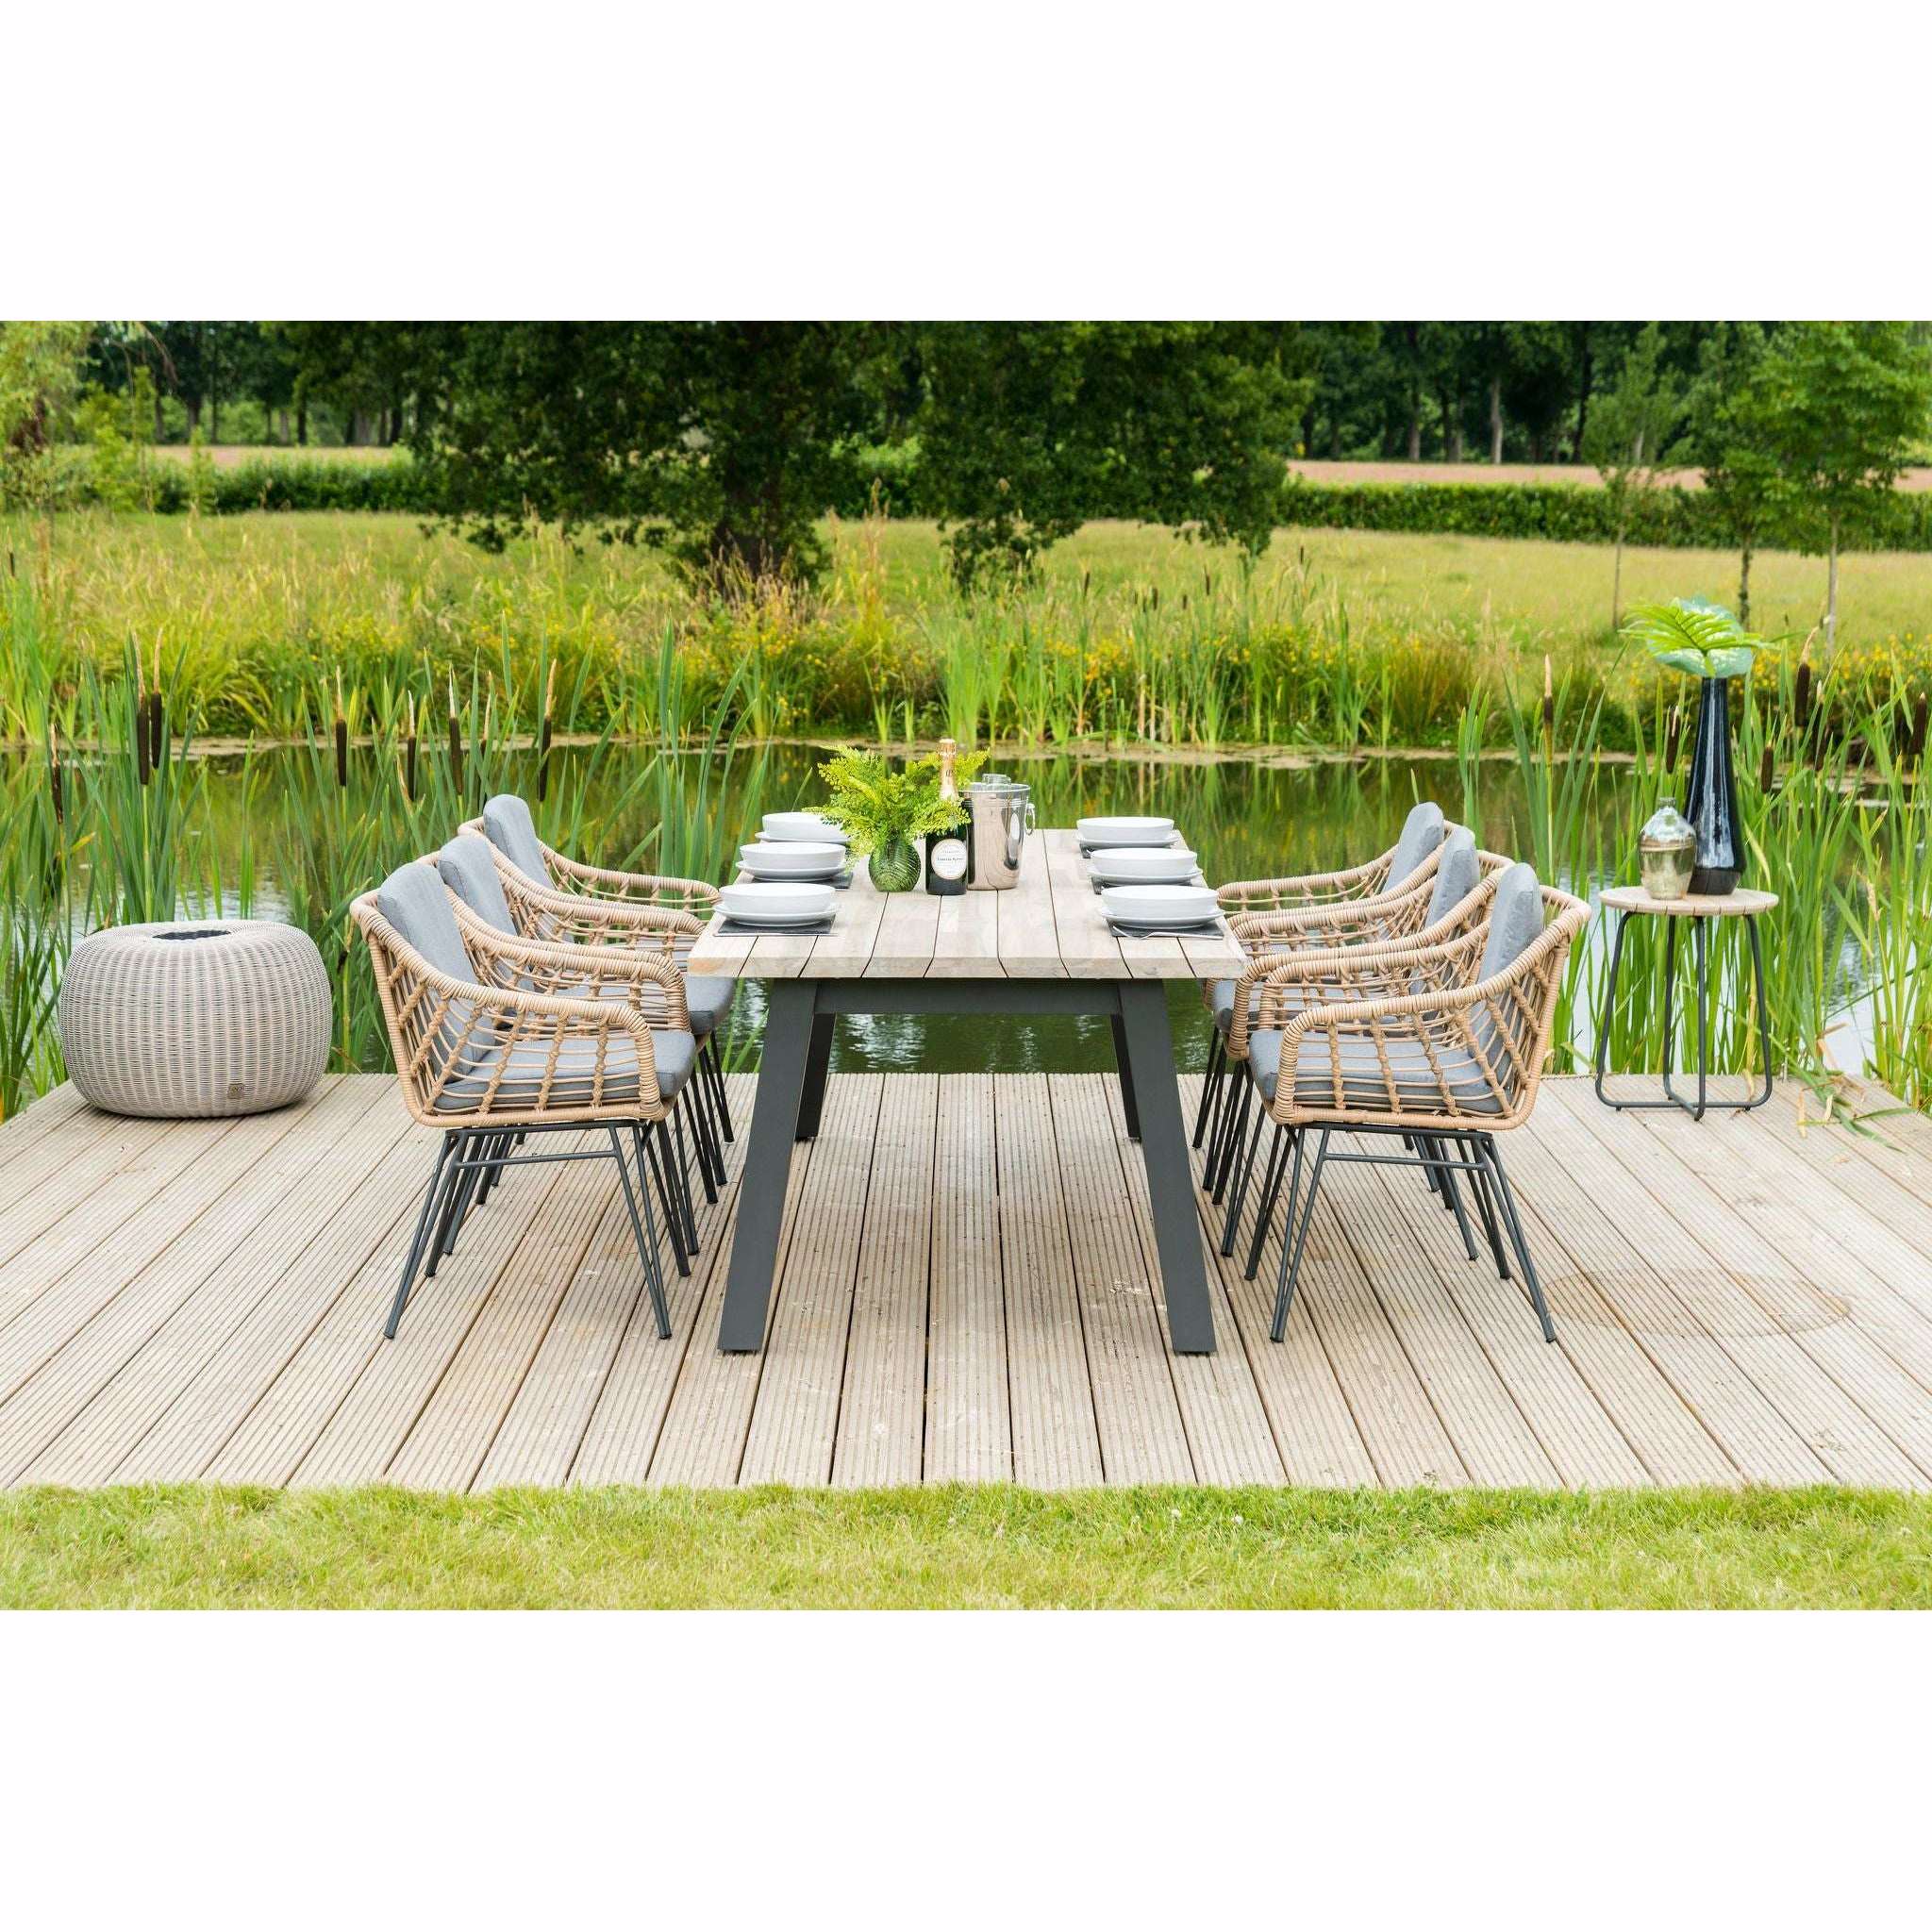 Exceptional Garden:4 Seasons Outdoor Cottage Hara 6 seater Dining set with 240cm Derby Teak Dining Table